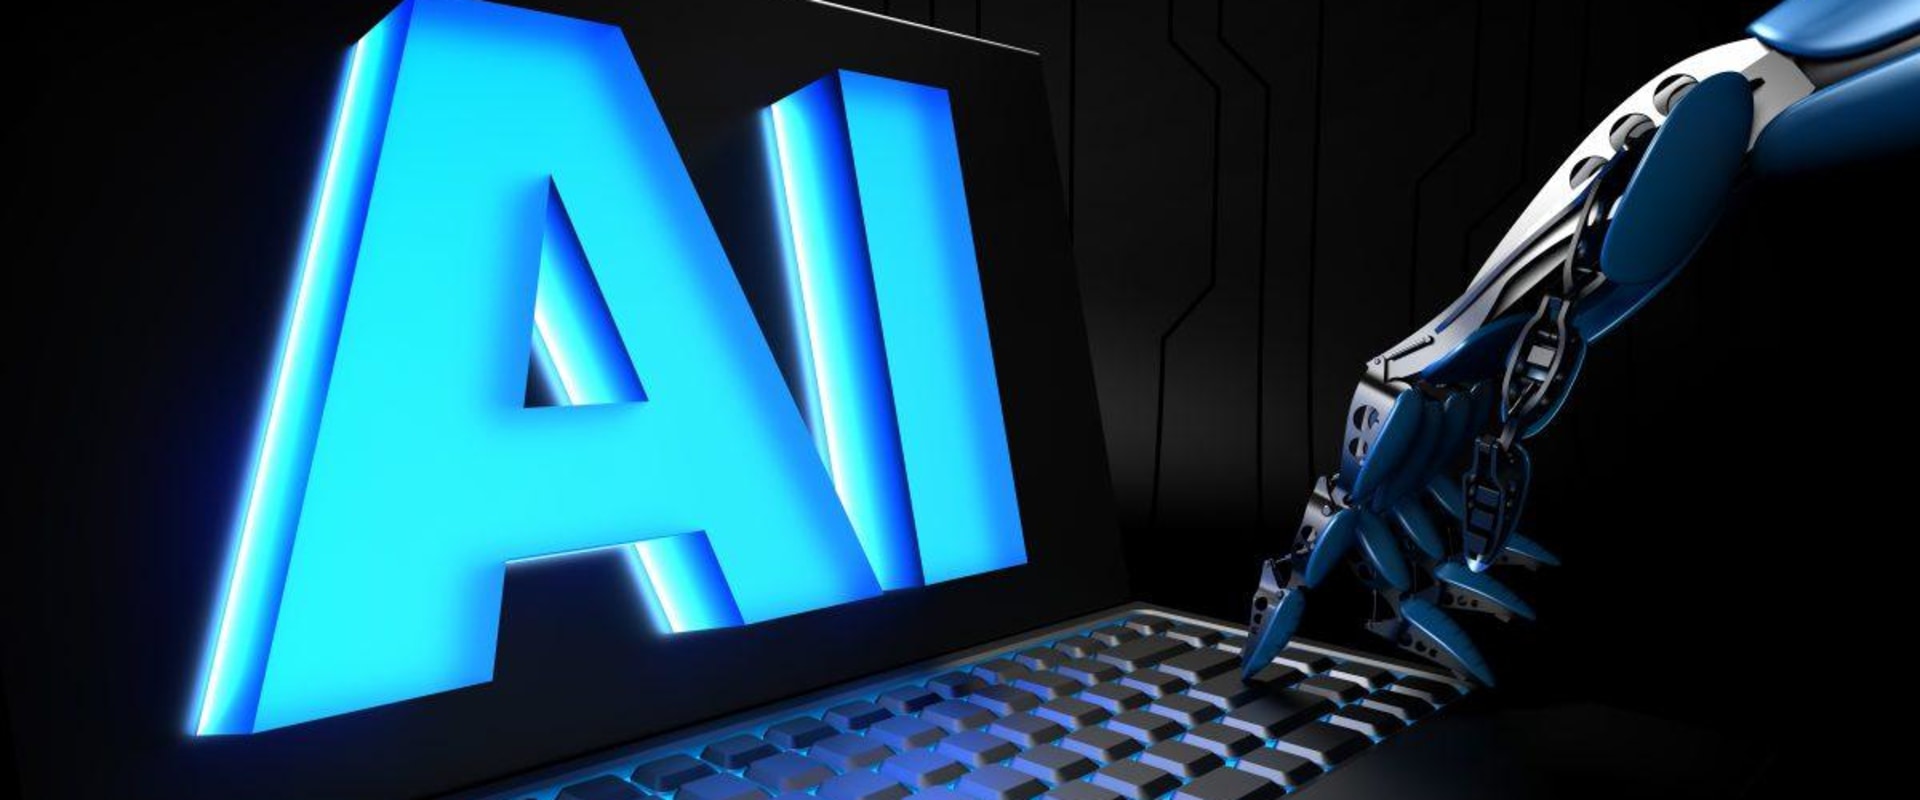 What is artificial intelligence in computer?